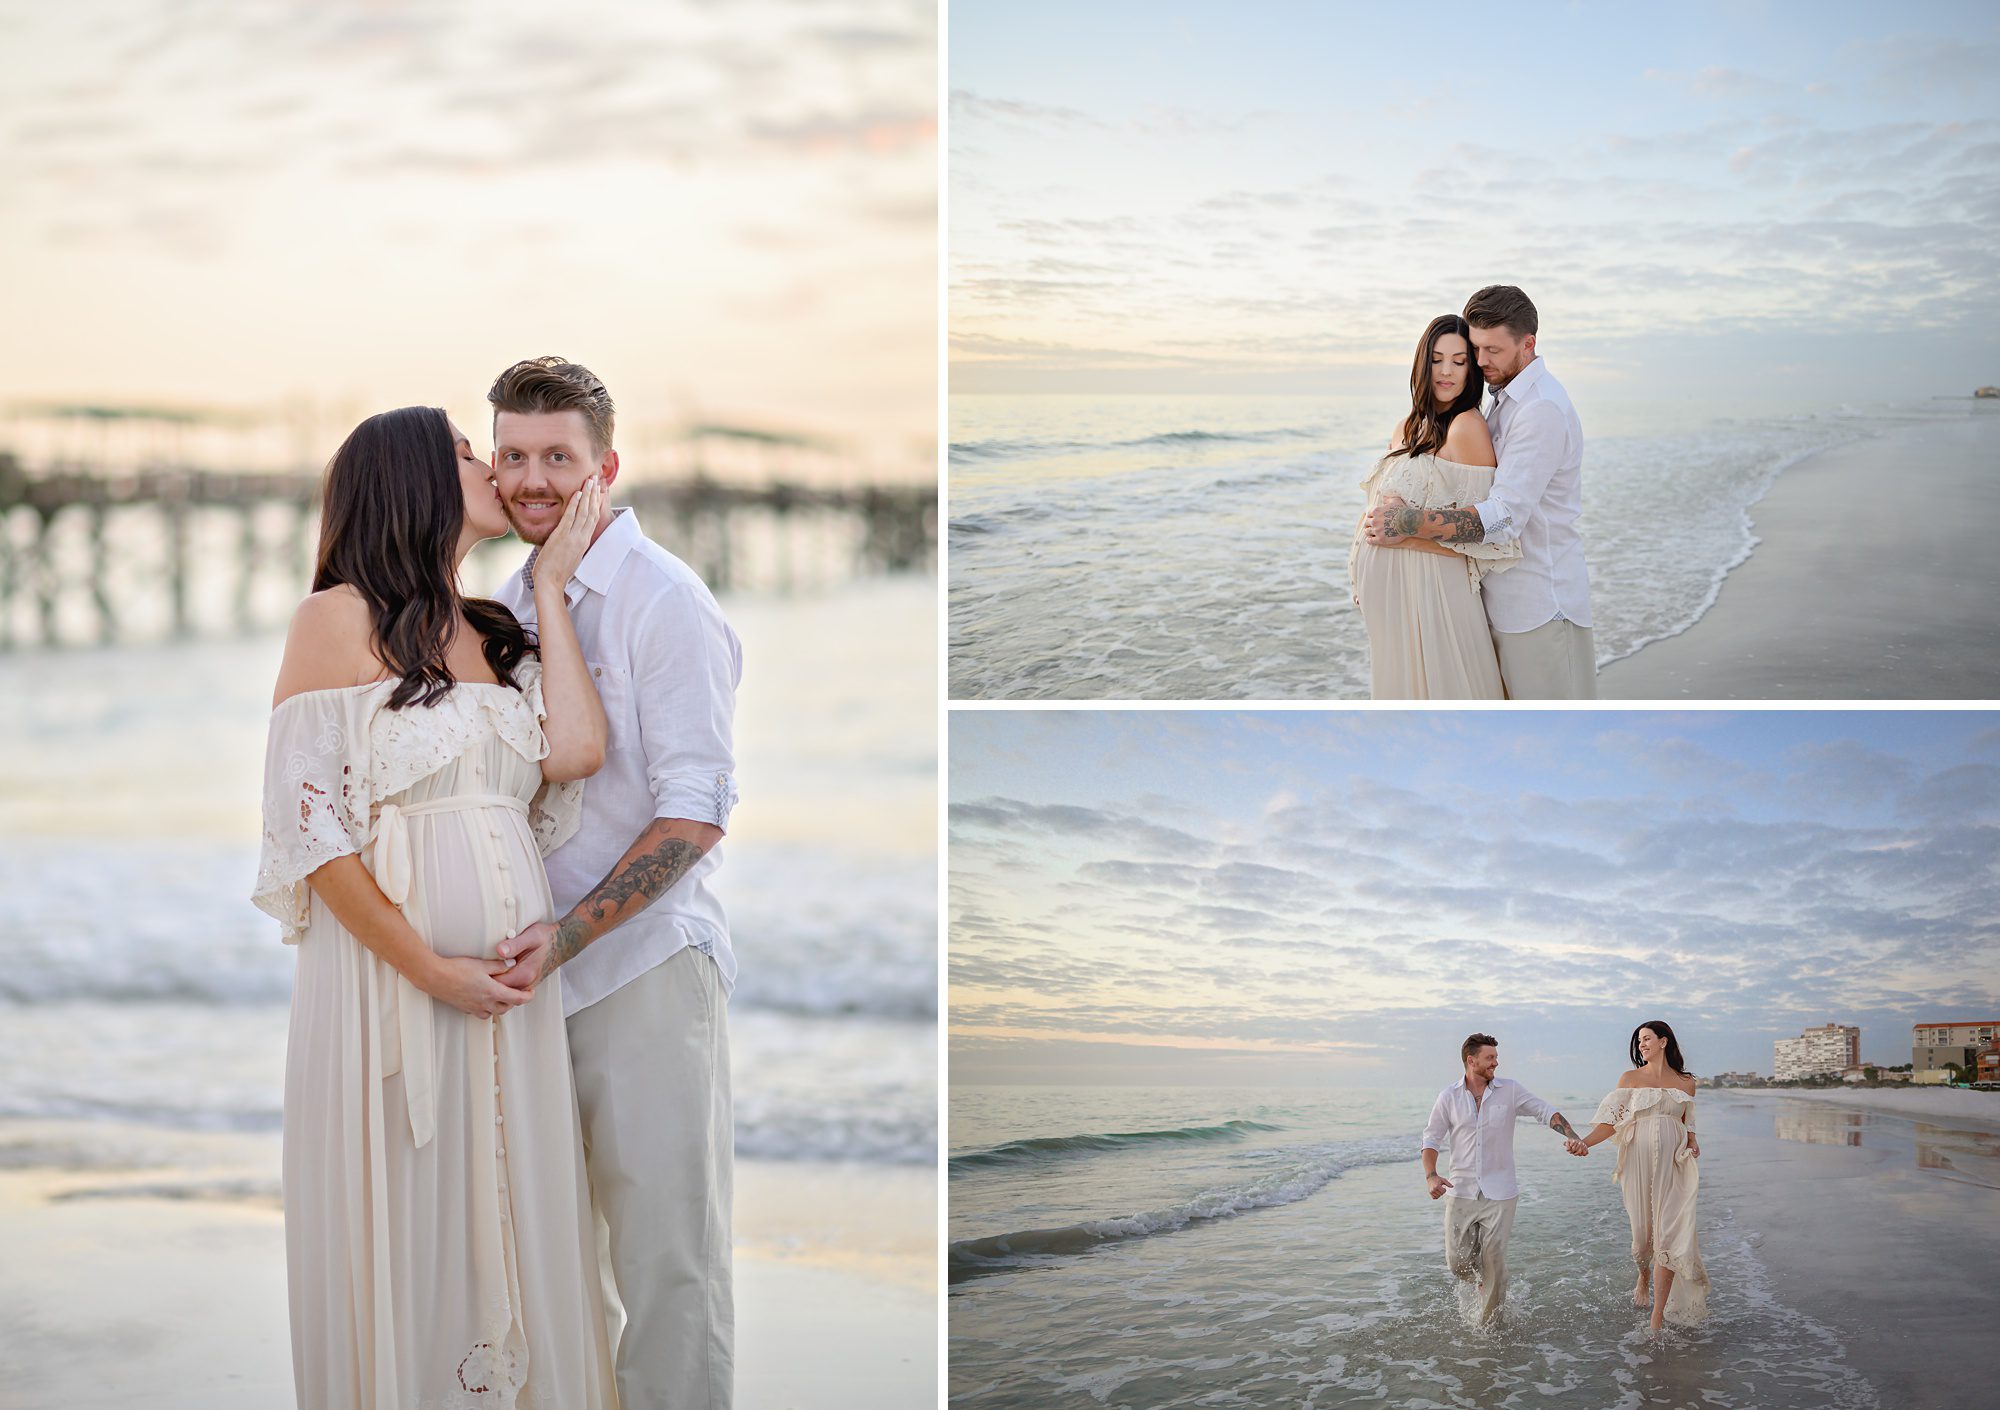 A young couple expecting their first baby get maternity portraits done at the beach at sunset.